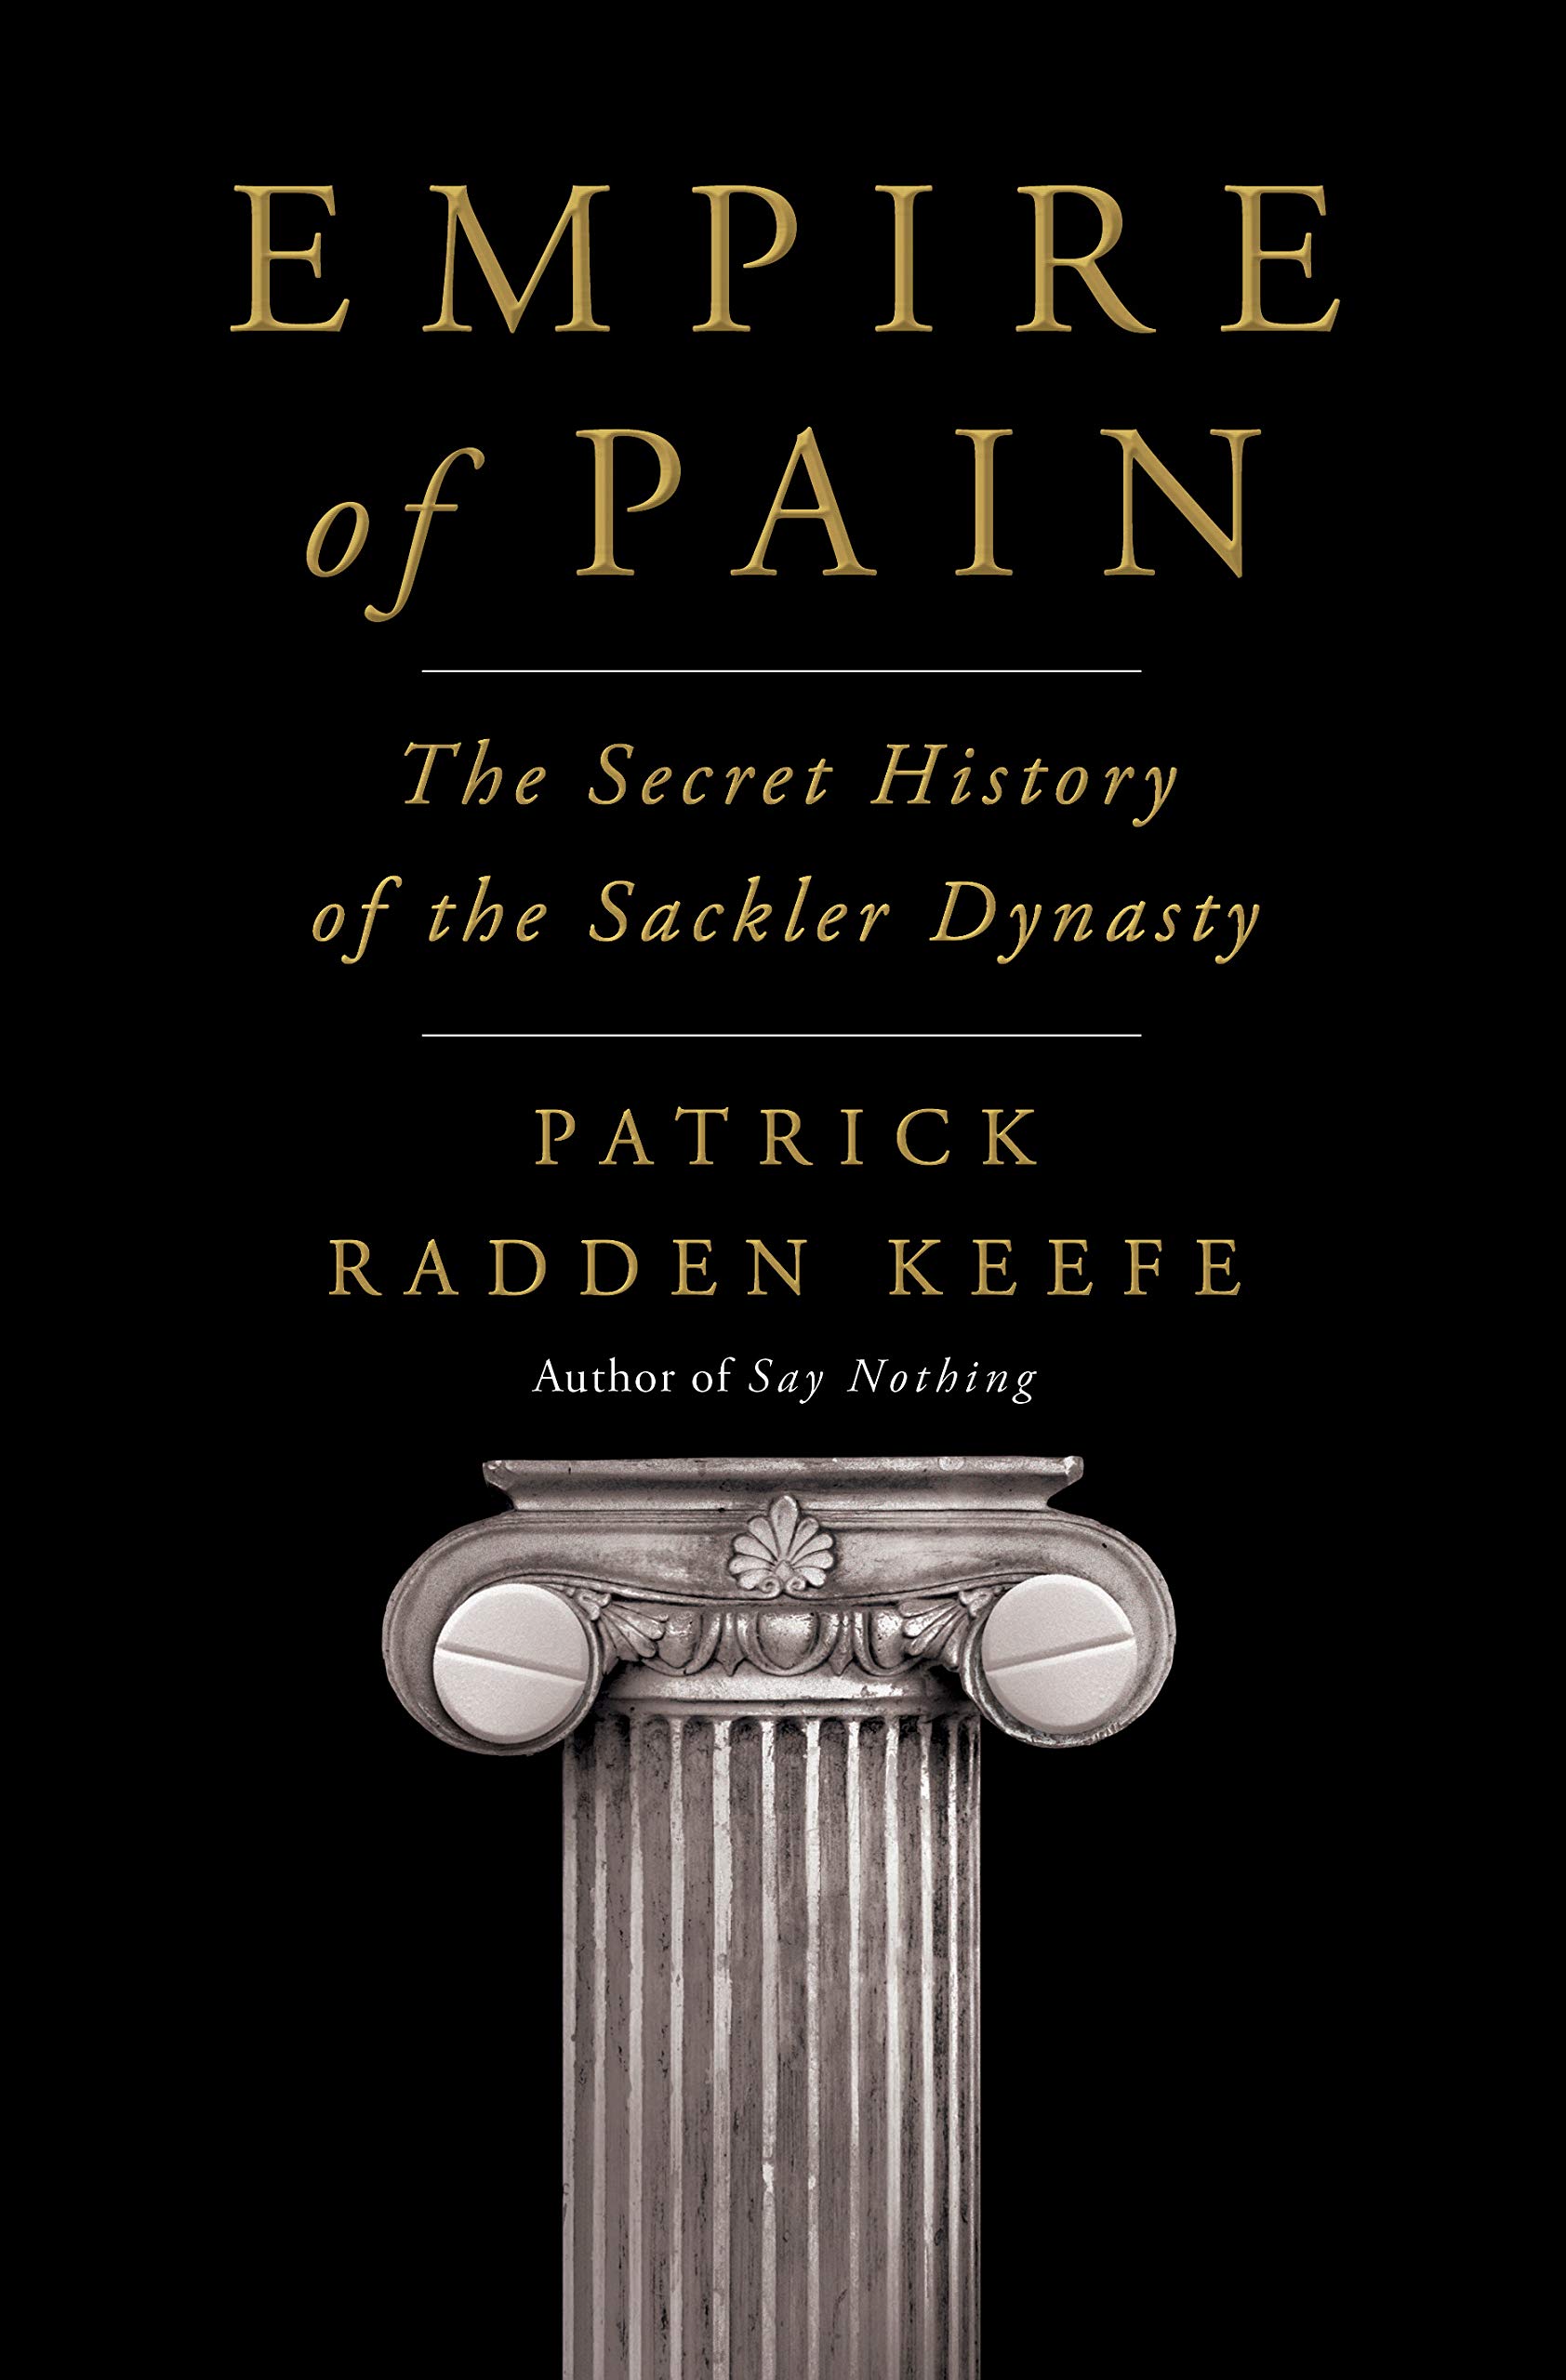 Download Empire of Pain: The Secret History of the Sackler Dynasty PDF by Patrick Radden Keefe